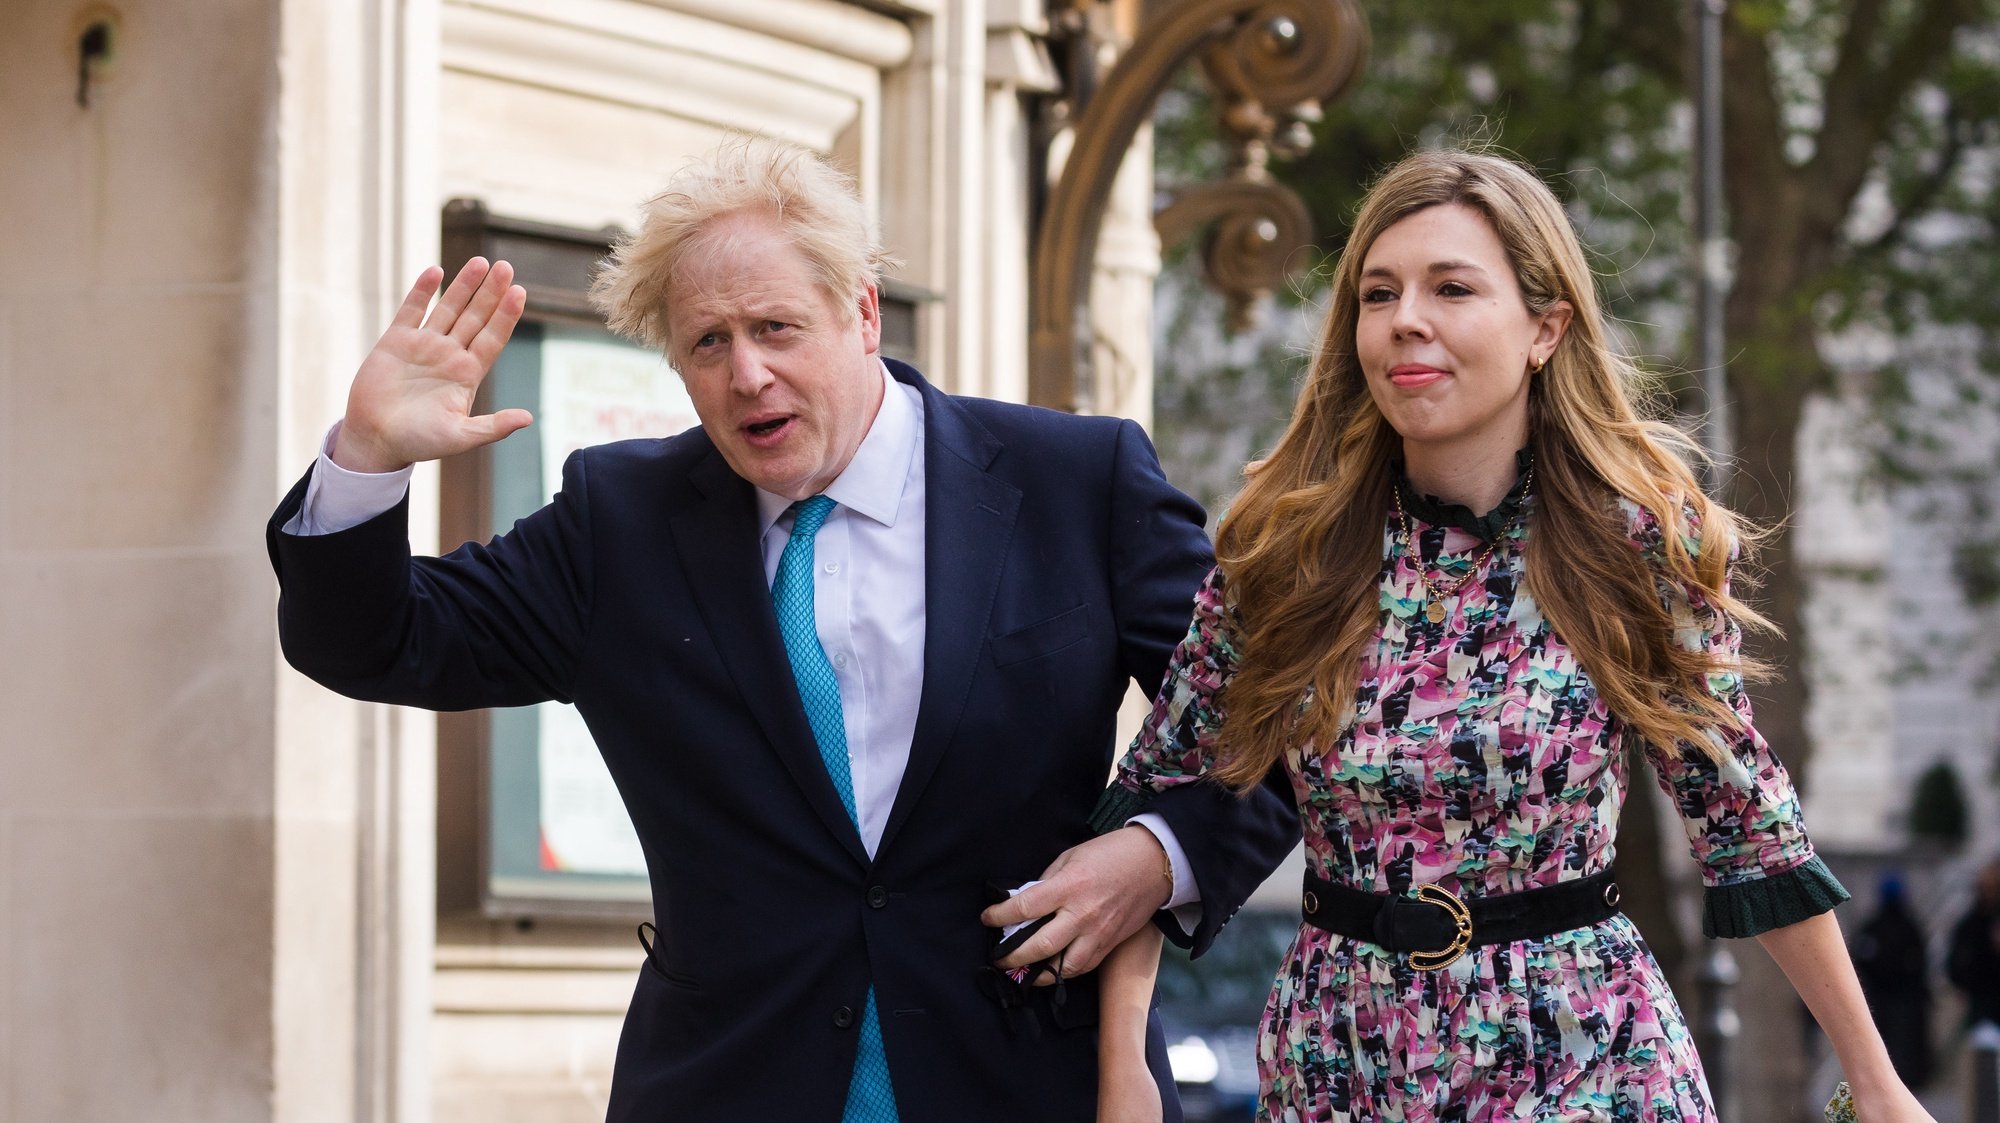 epa09236483 (FILE) - Britain&#039;s Prime Minster Boris Johnson (L) and his partner Carrie Symonds arrive at a polling station to cast their votes for the local elections in London, Britain, 06 May 2021 (reissued 30 May 2021). Boris Johnson has married his fiancee Carrie Symonds in a private wedding ceremony on Saturday, 29 May 2021, Downing Street has confirmed.  EPA/VICKIE FLORES *** Local Caption *** 56873584